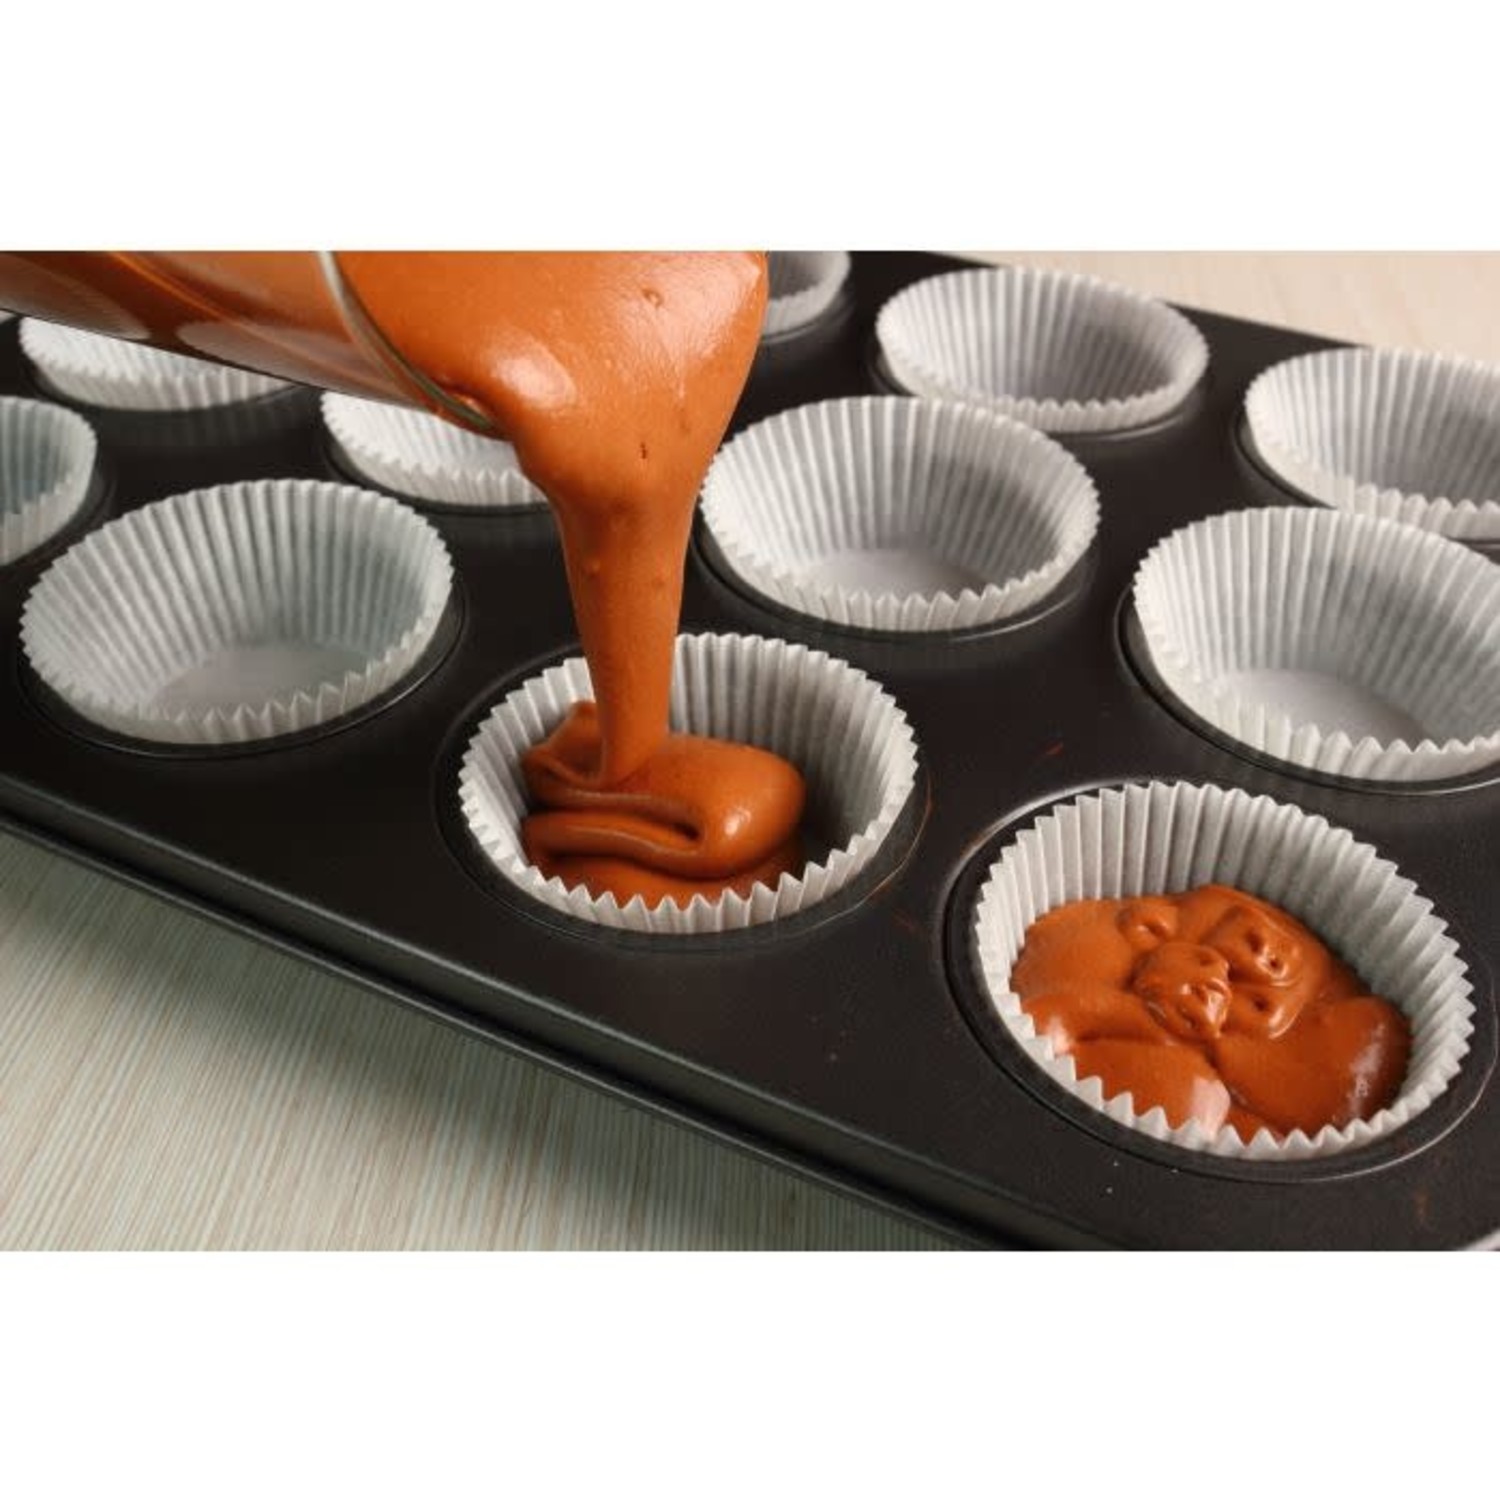 HIC 12 CUP SILICONE MUFFIN PAN